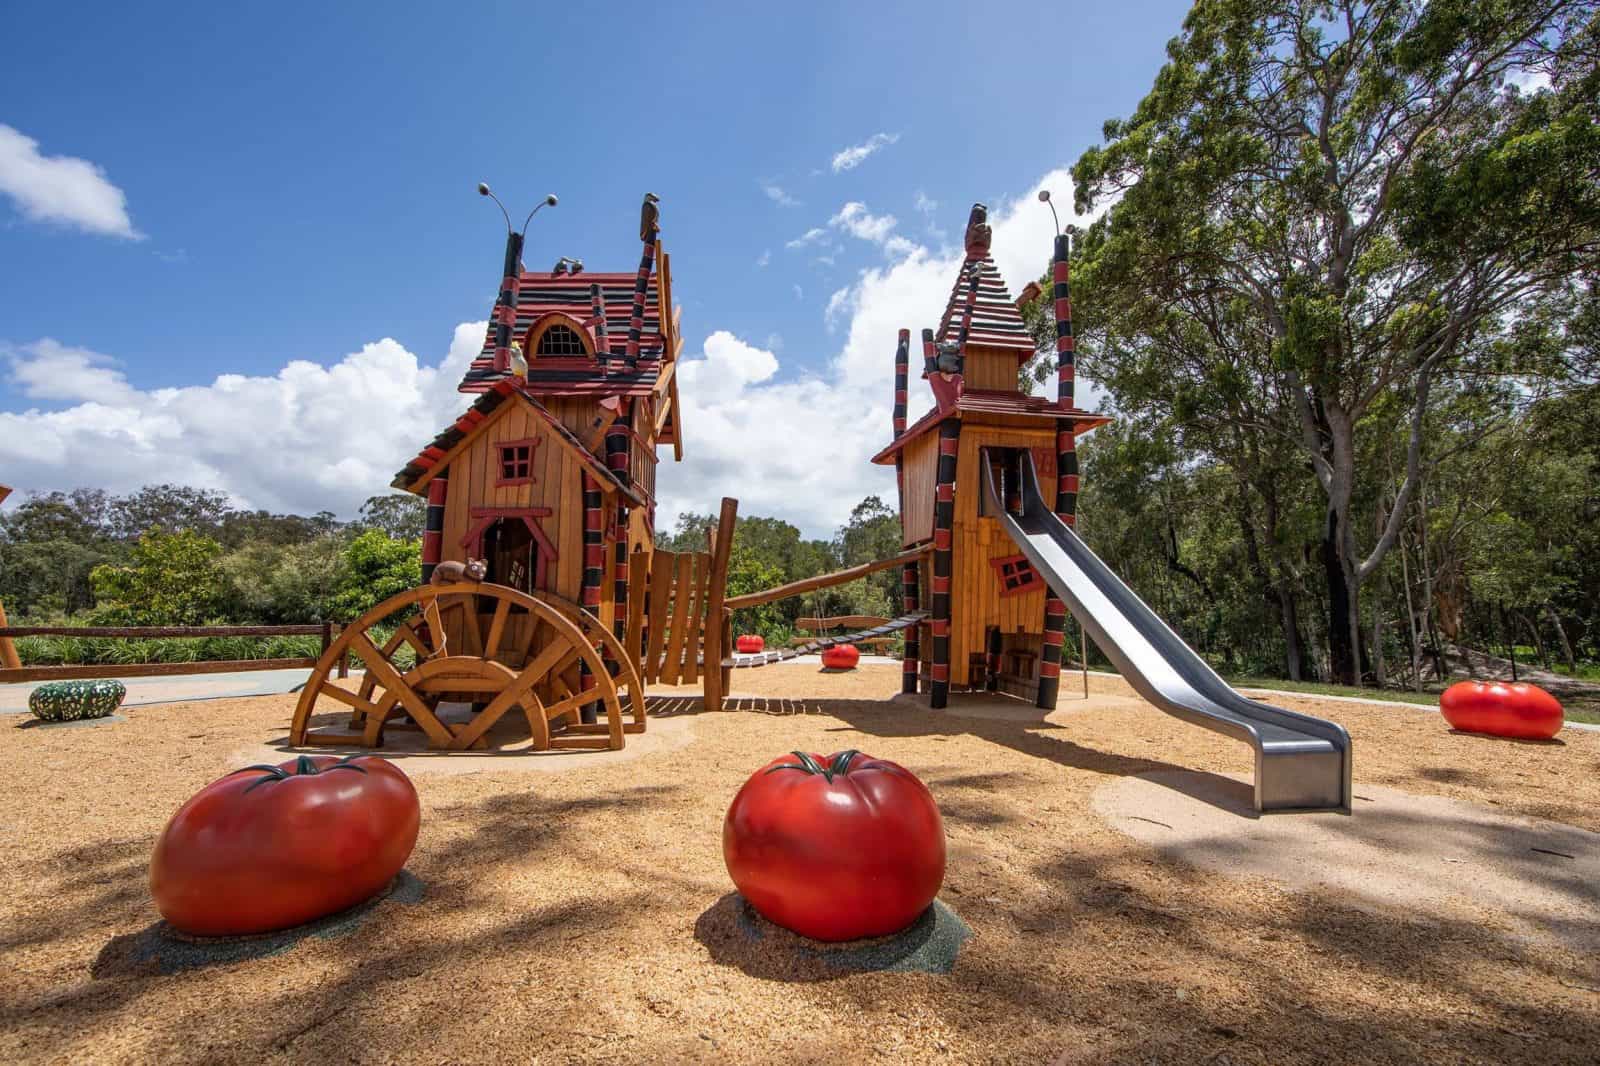 Two Halloween themed playground towers with a metal slide and two over sized tomatoes in foreground